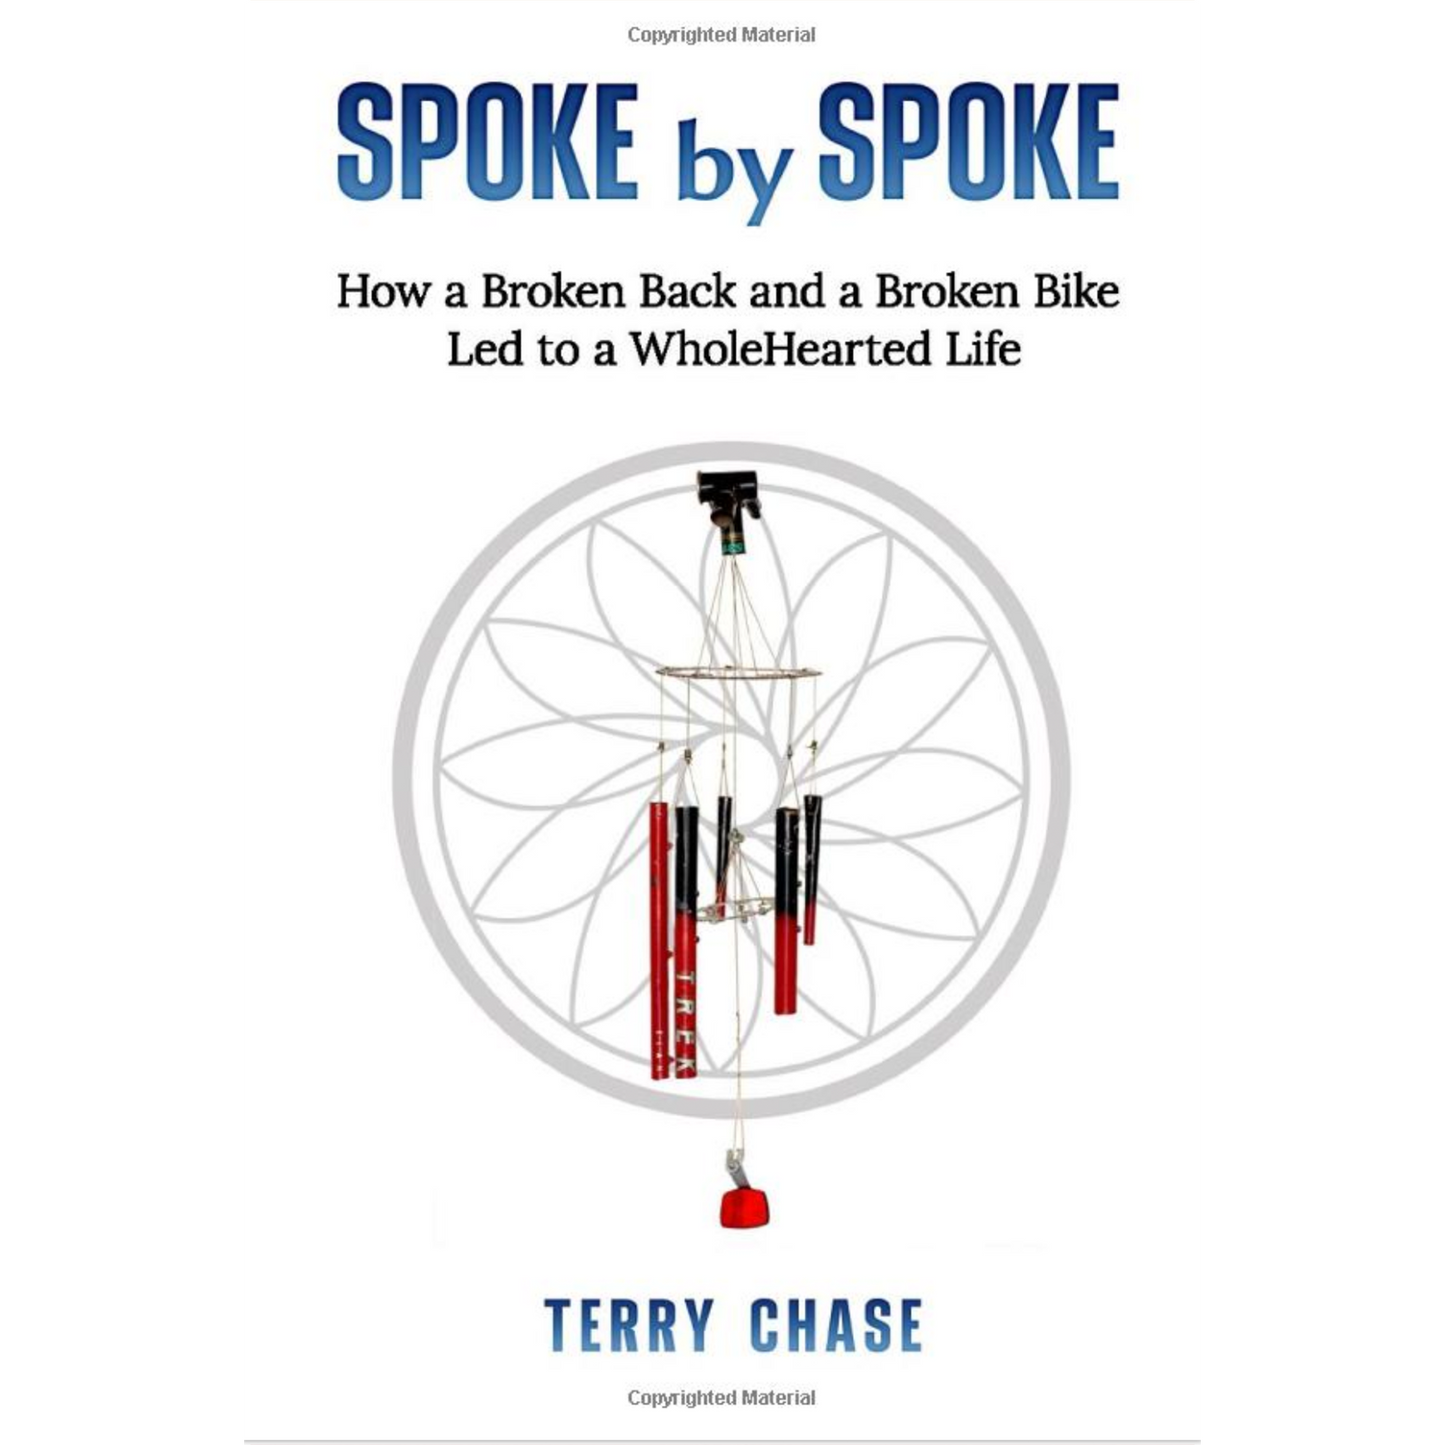 Spoke by Spoke: How a Broken Back and a Broken Bike Led to a WholeHearted Life